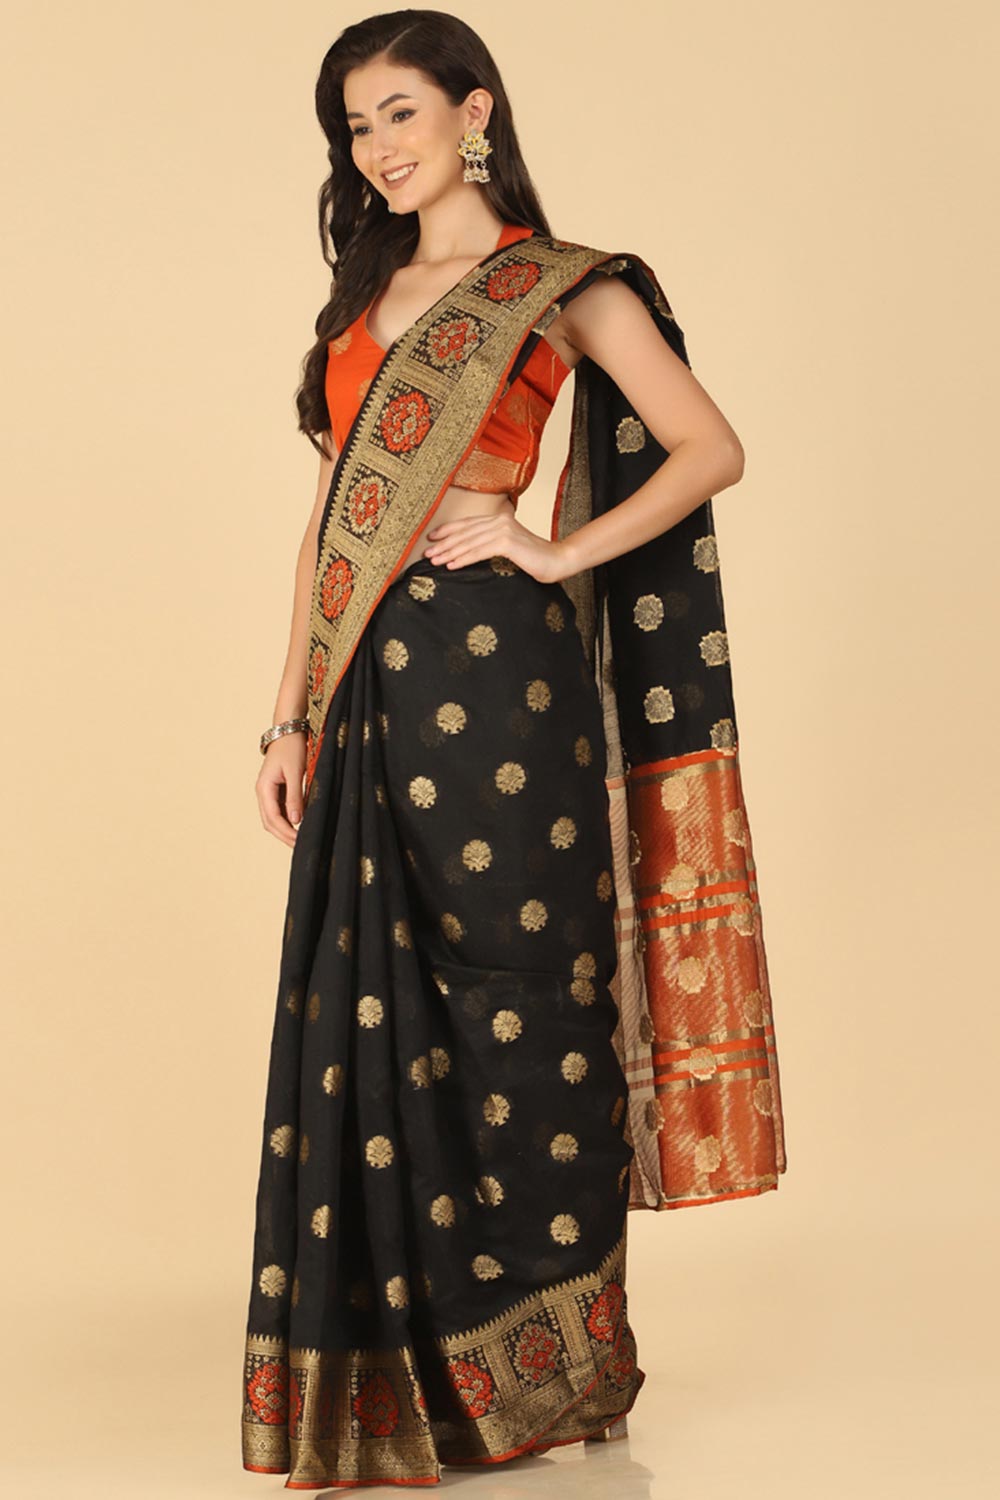 Shop Kabira Black Resham Woven Art Silk One Minute Saree at best offer at our  Store - One Minute Saree